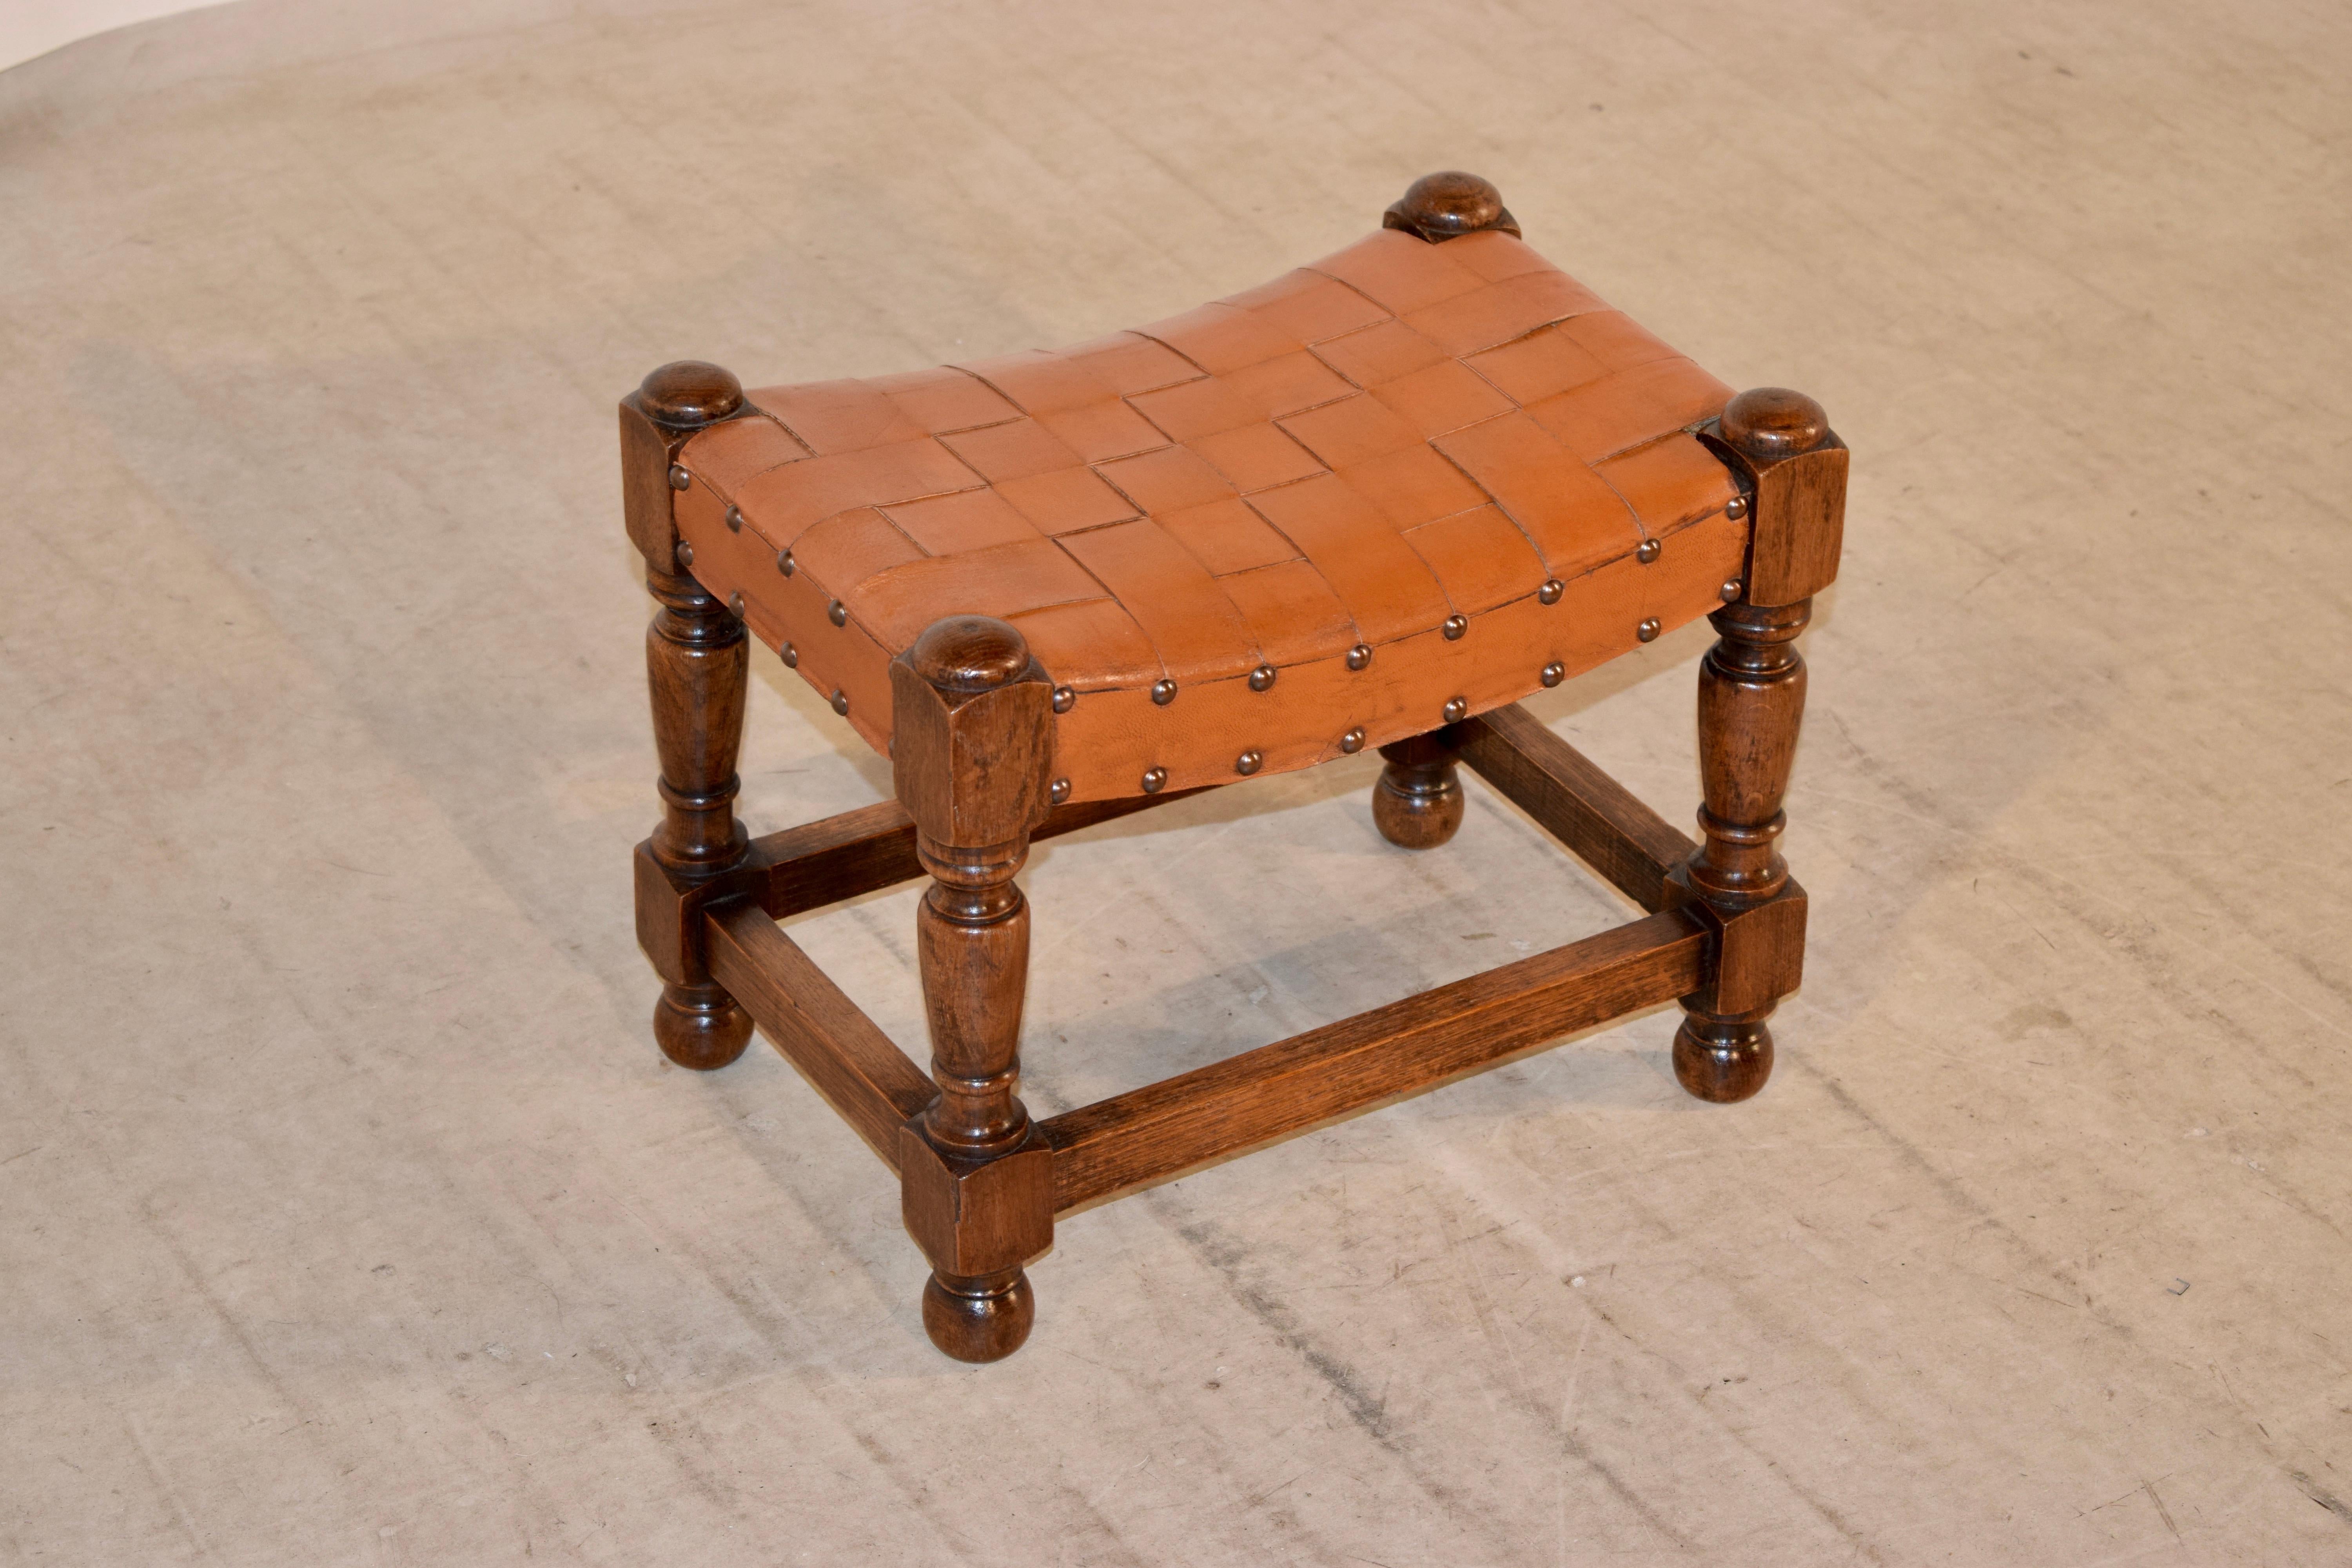 Late 19th century stool from England with a braided leather swayed top, following down to hand turned legs, joined by simple stretchers. Raised on turned feet.